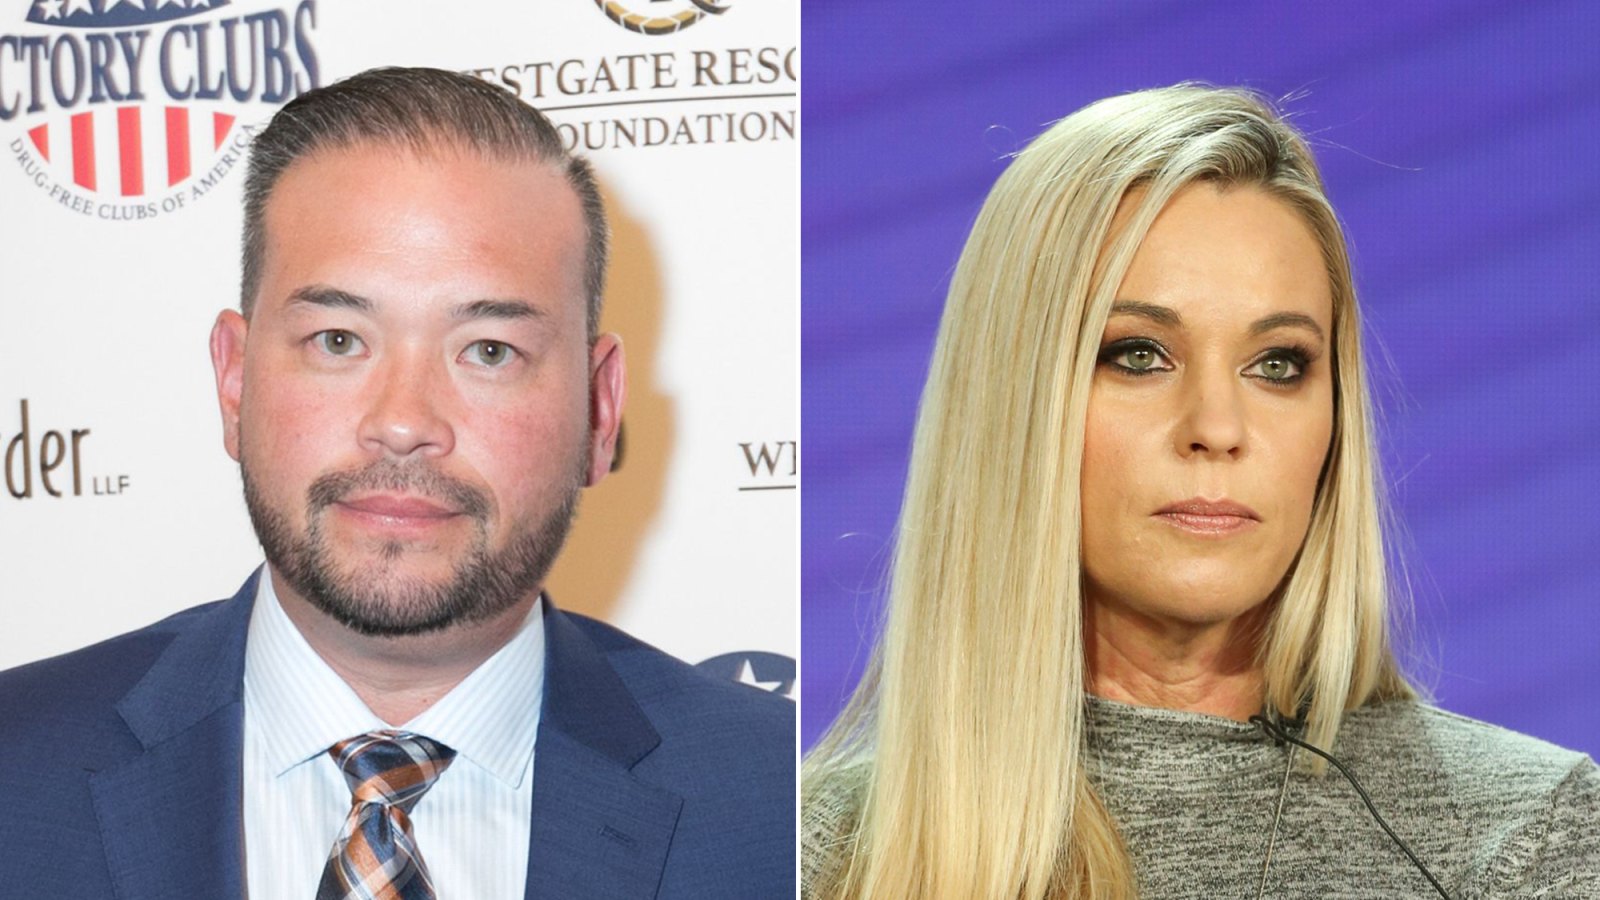 Jon Gosselin Says Coparenting Won't 'Ever Exist' With Ex-Wife Kate: 'We Are Never Going to See Eye to Eye'